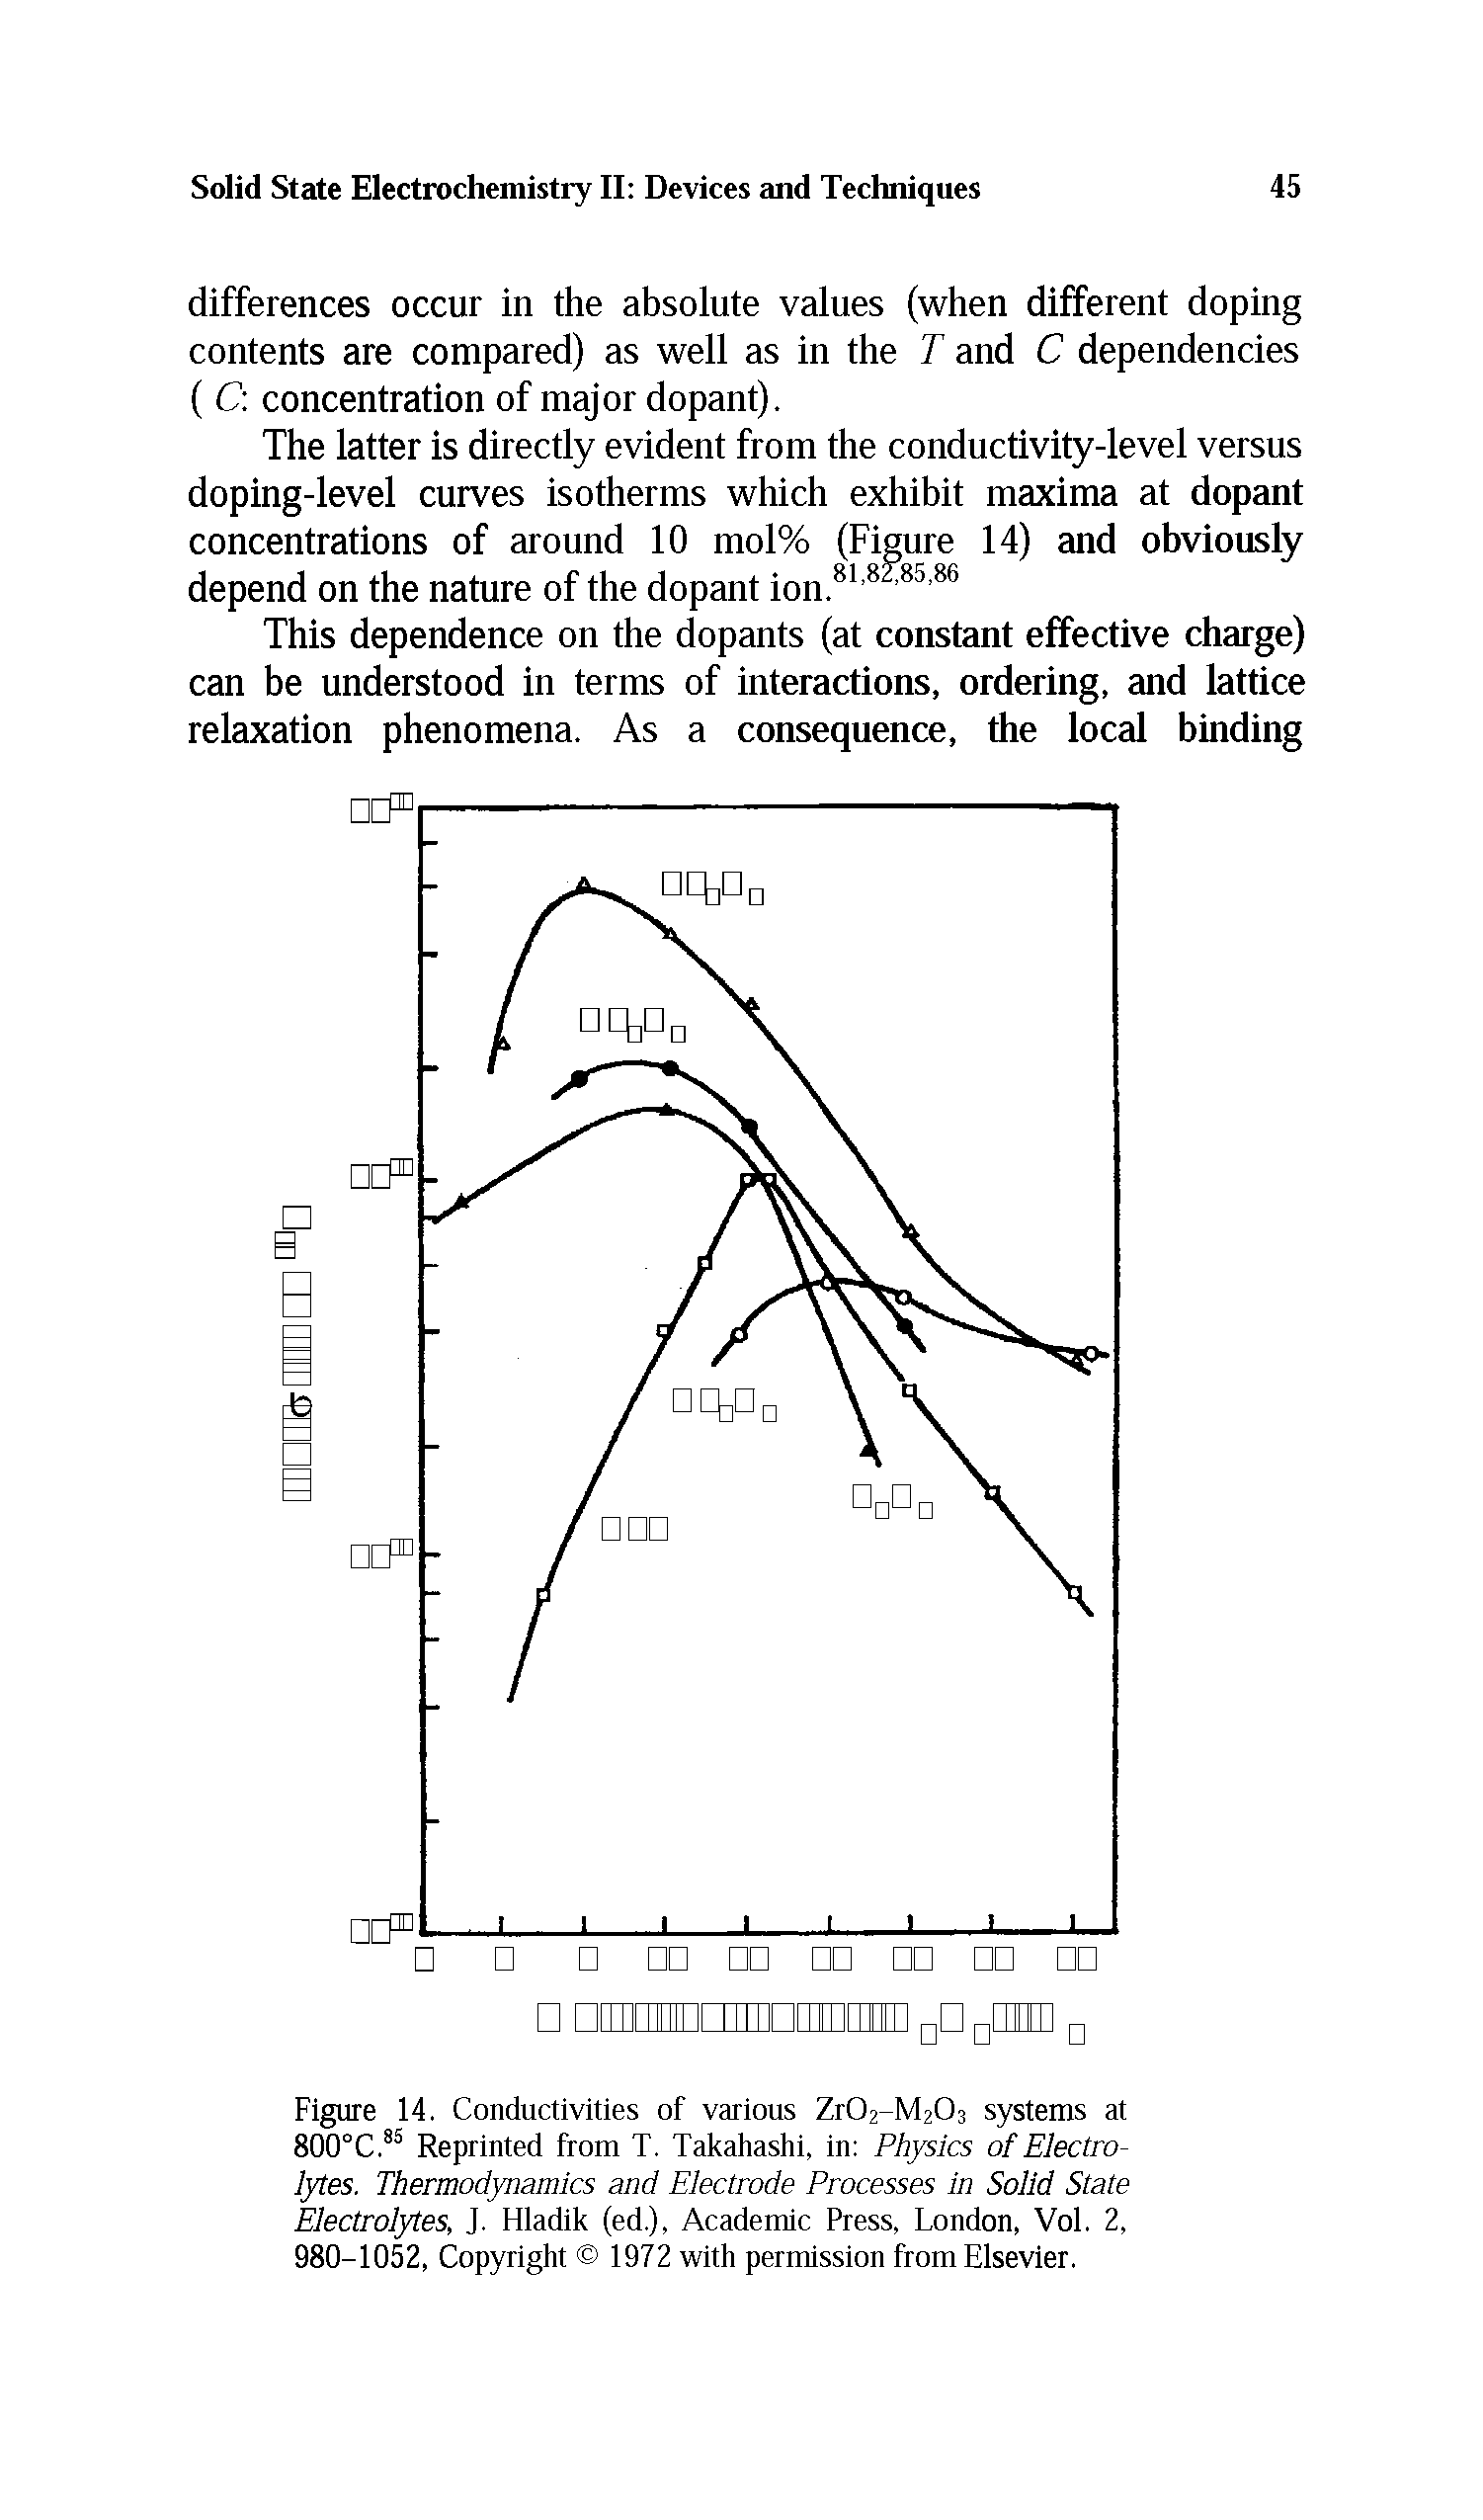 Figure 14. Conductivities of various Zr02-M203 systems at 800°C.85 Reprinted from T. Takahashi, in Physics of Electrolytes. Thermodynamics and Electrode Processes in Solid State Electrolytes, J. Hladik (ed.), Academic Press, London, Vol. 2, 980-1052, Copyright 1972 with permission from Elsevier.